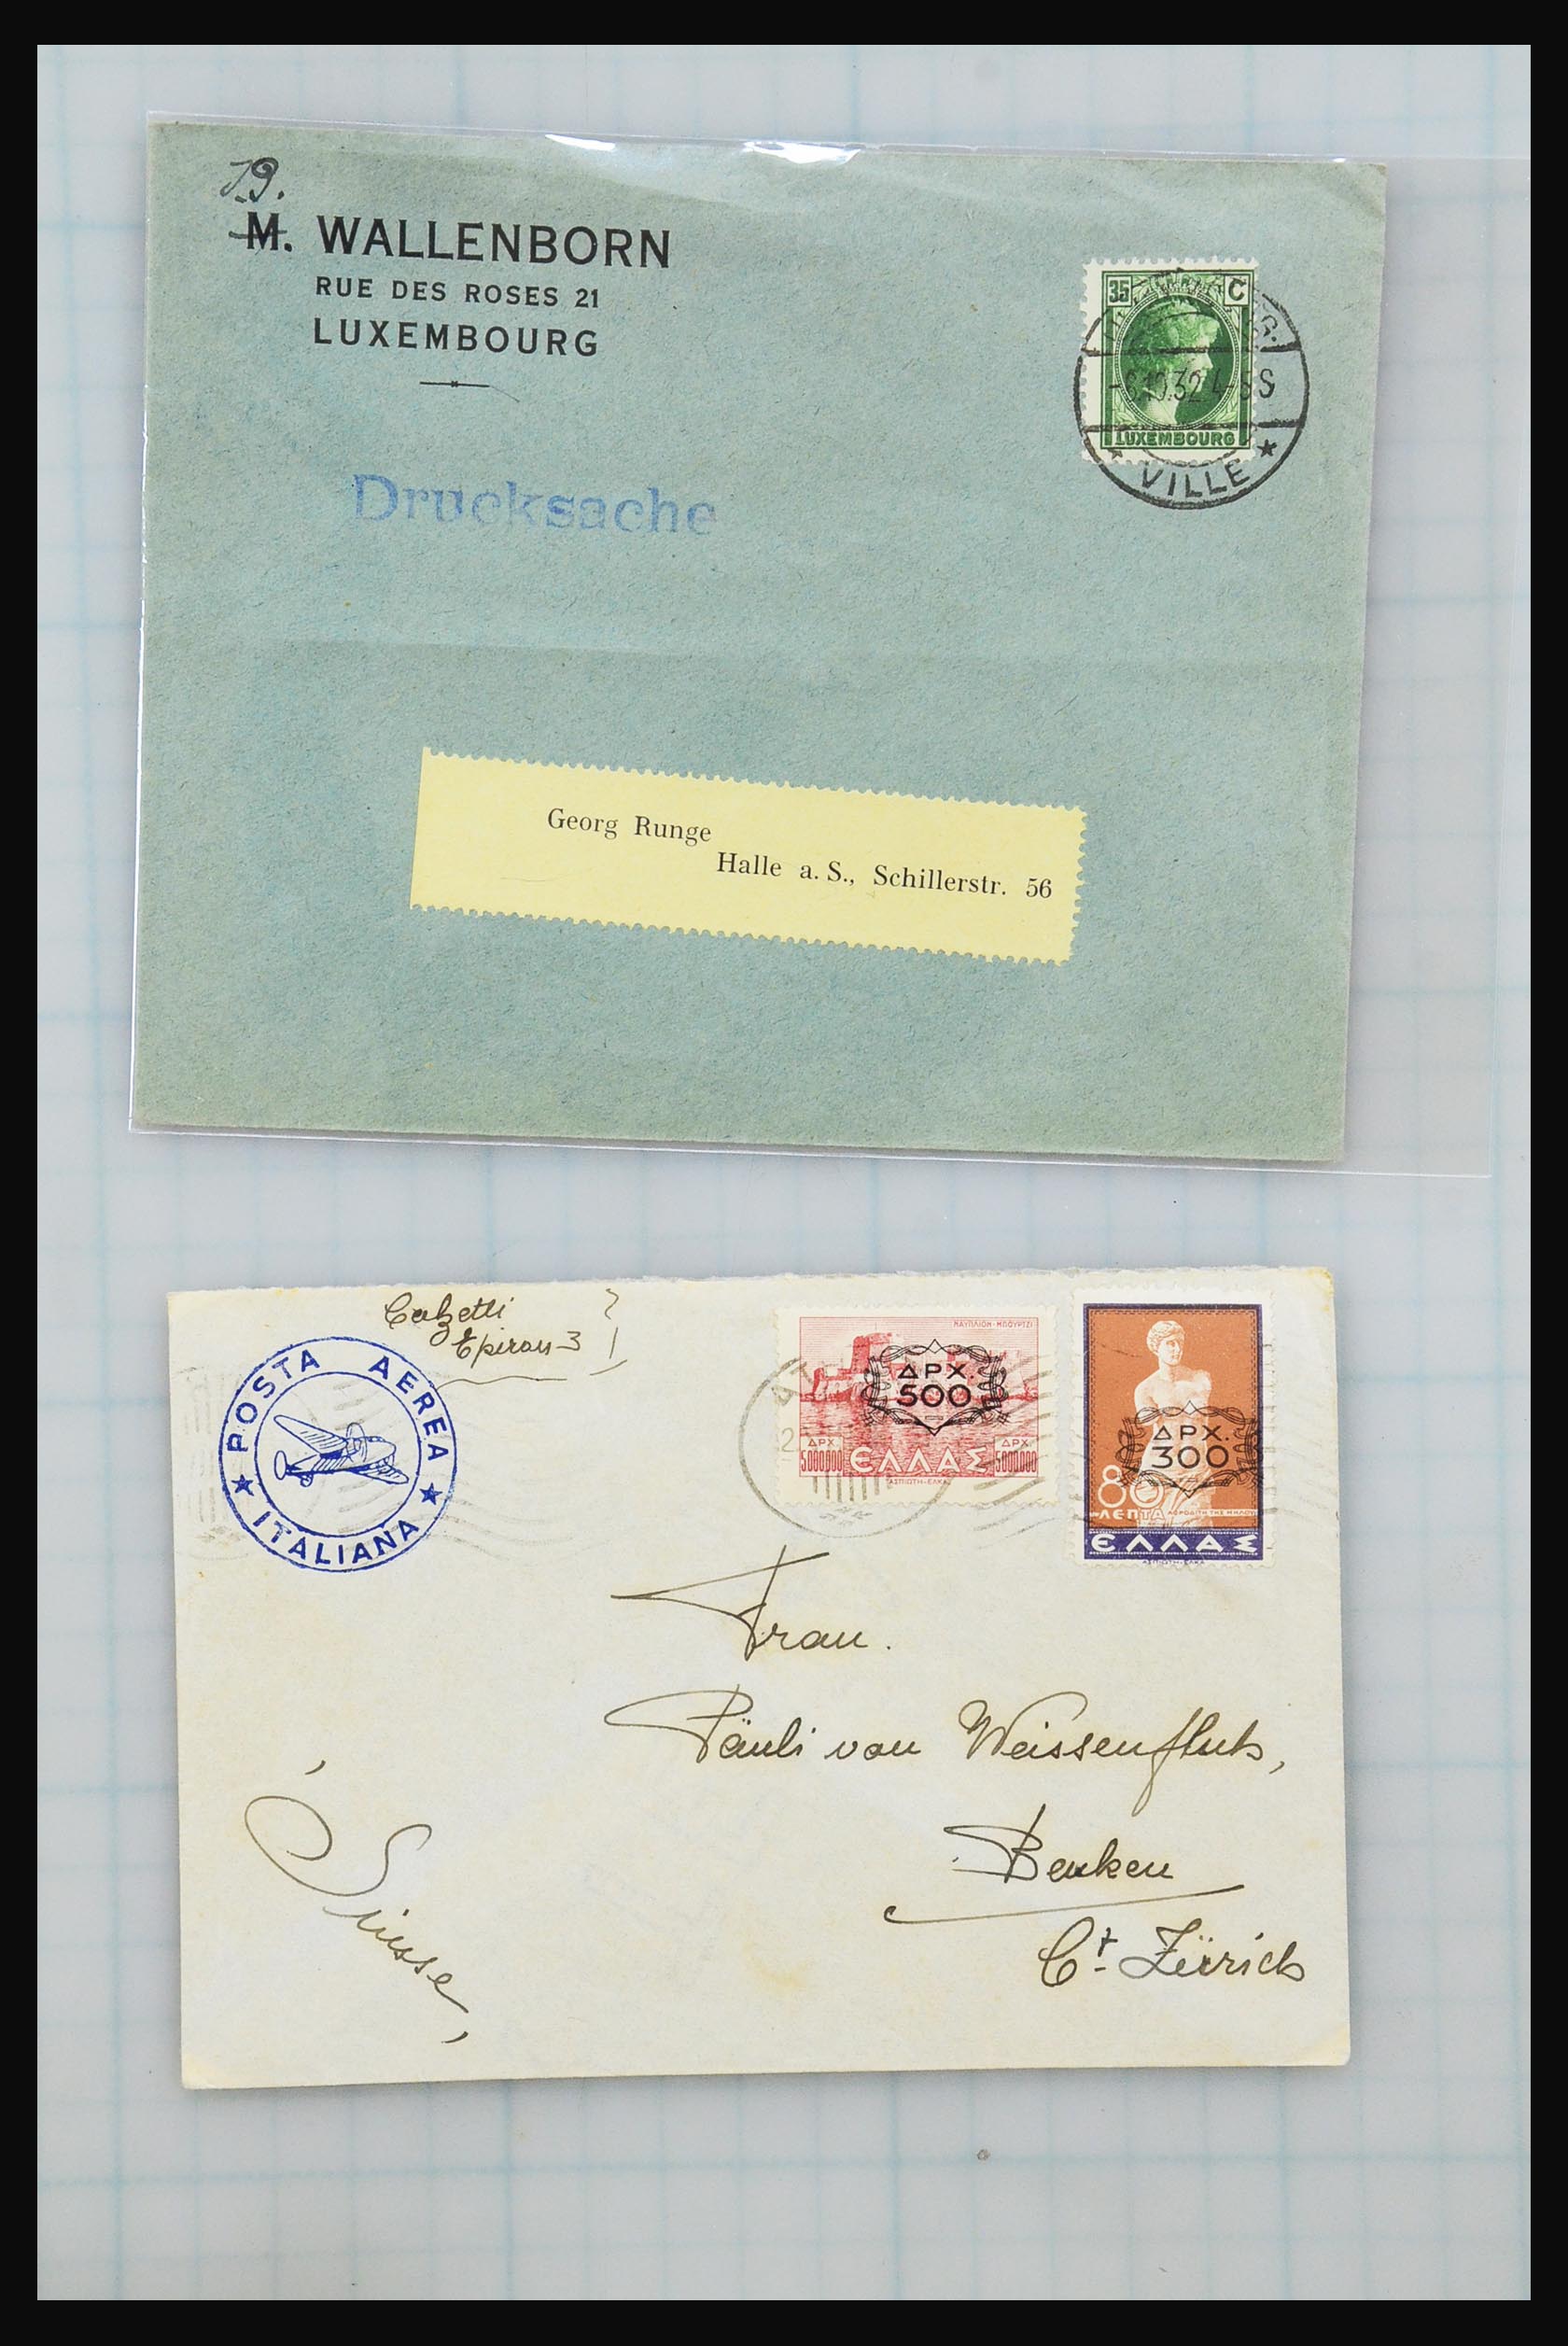 31358 091 - 31358 Portugal/Luxemburg/Greece covers 1880-1960.